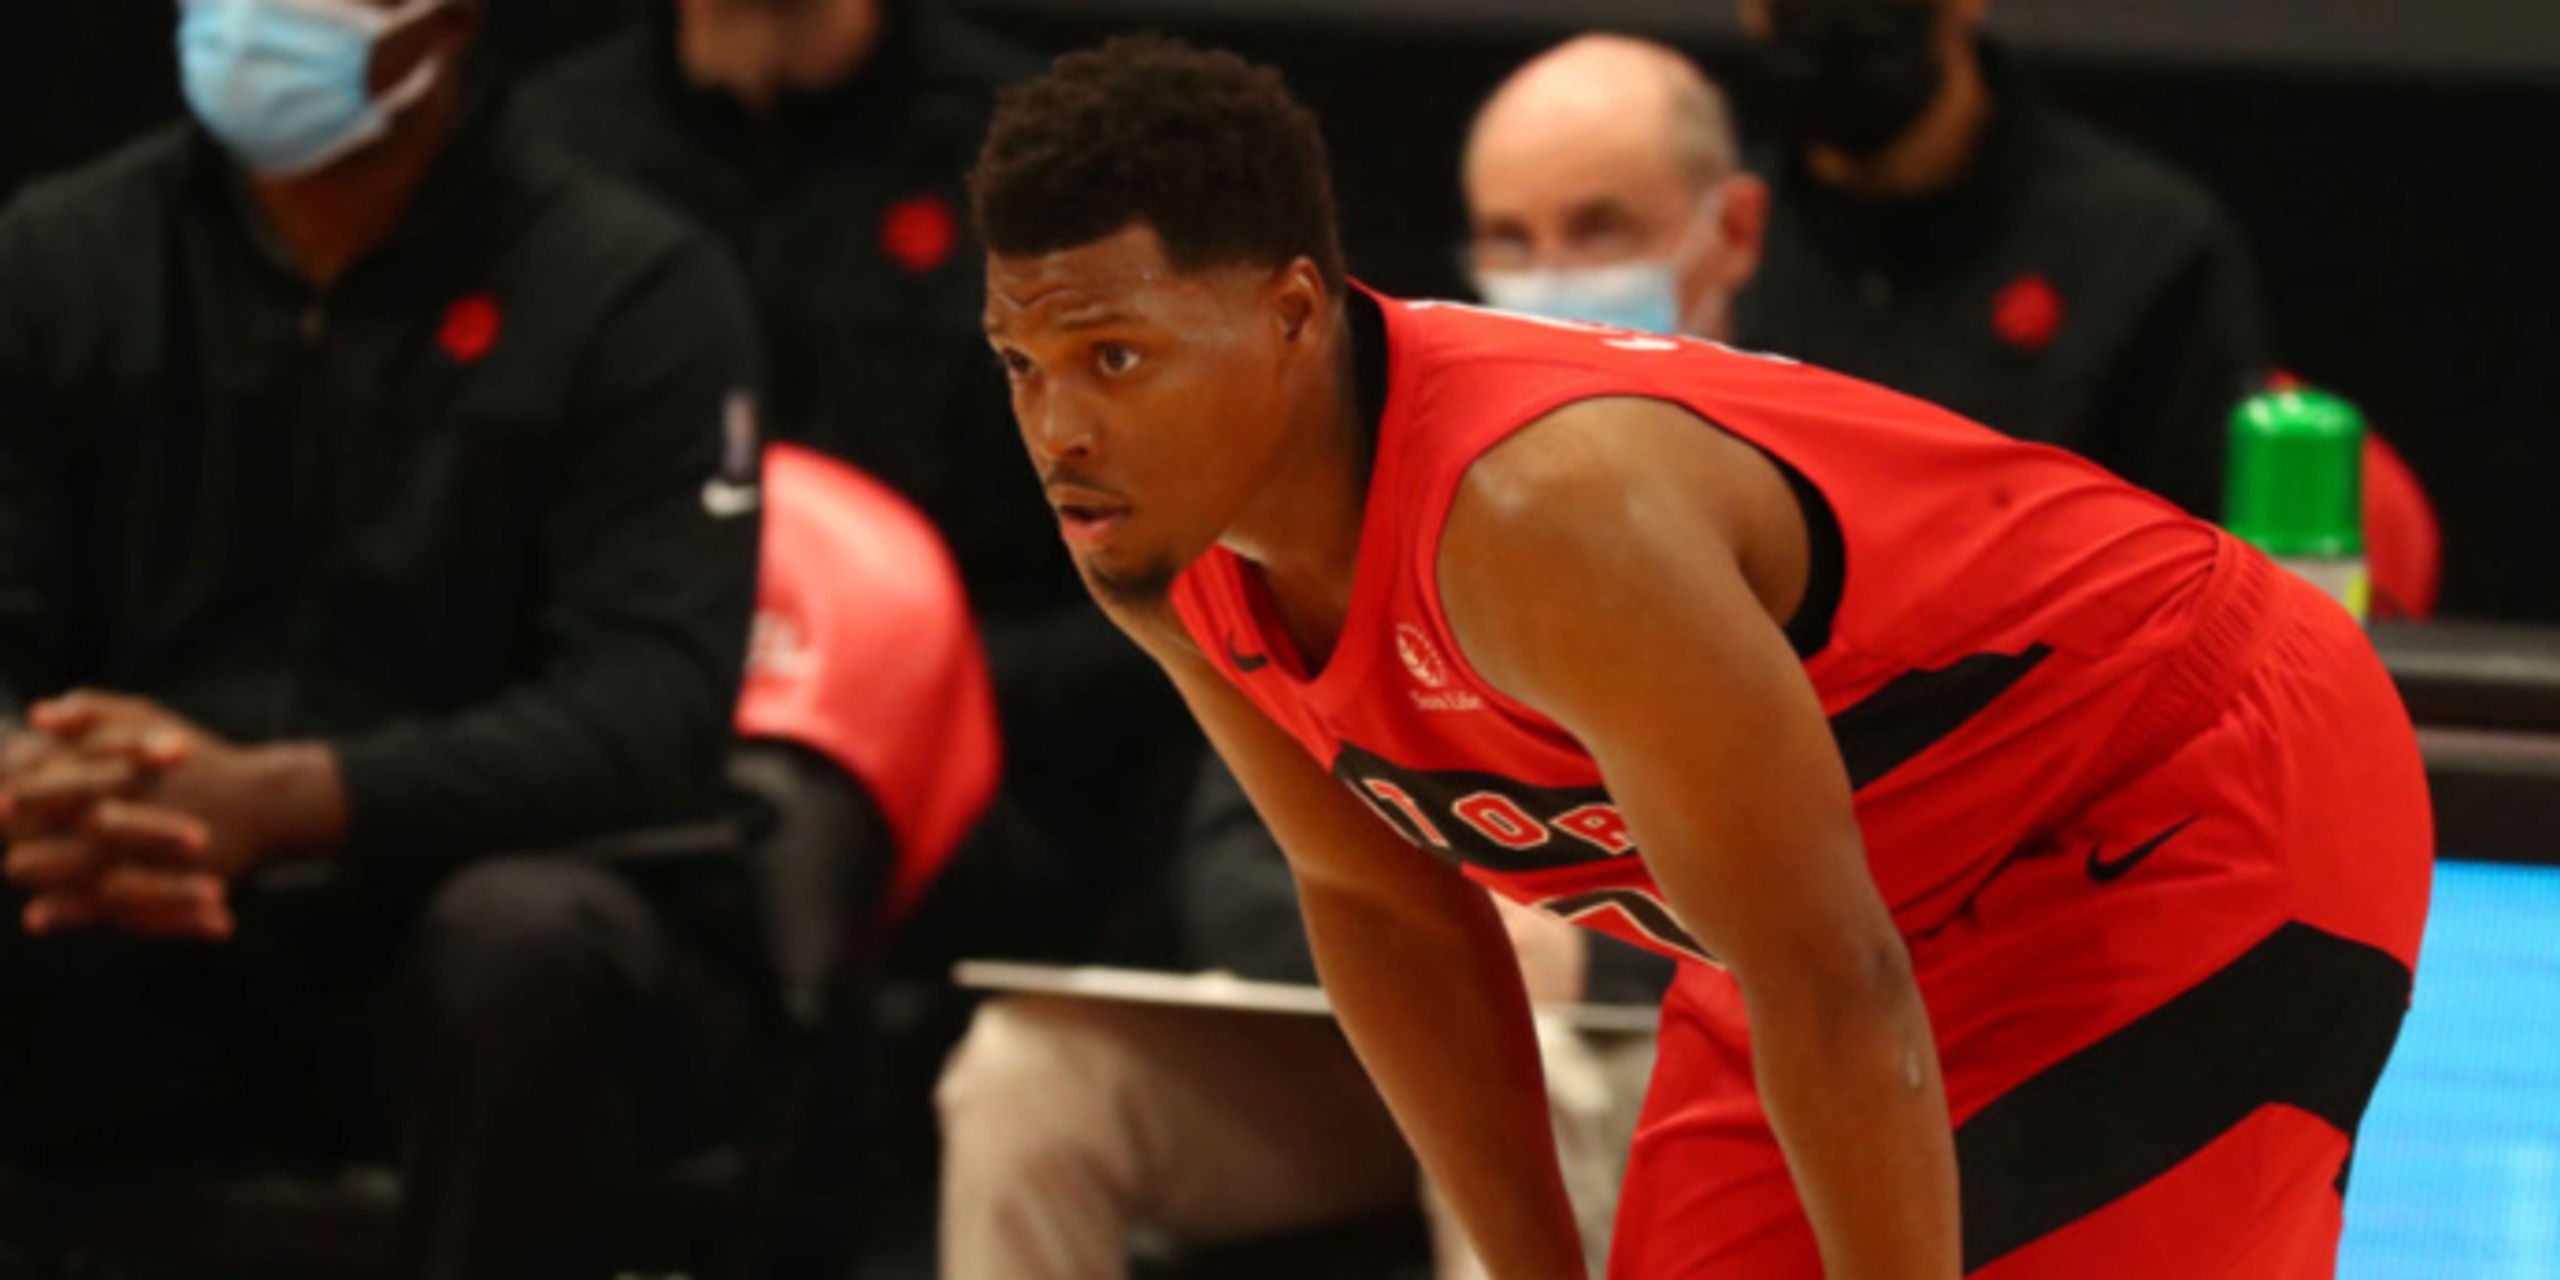 'Rising buzz' that Pelicans will seriously pursue Kyle Lowry in free agency